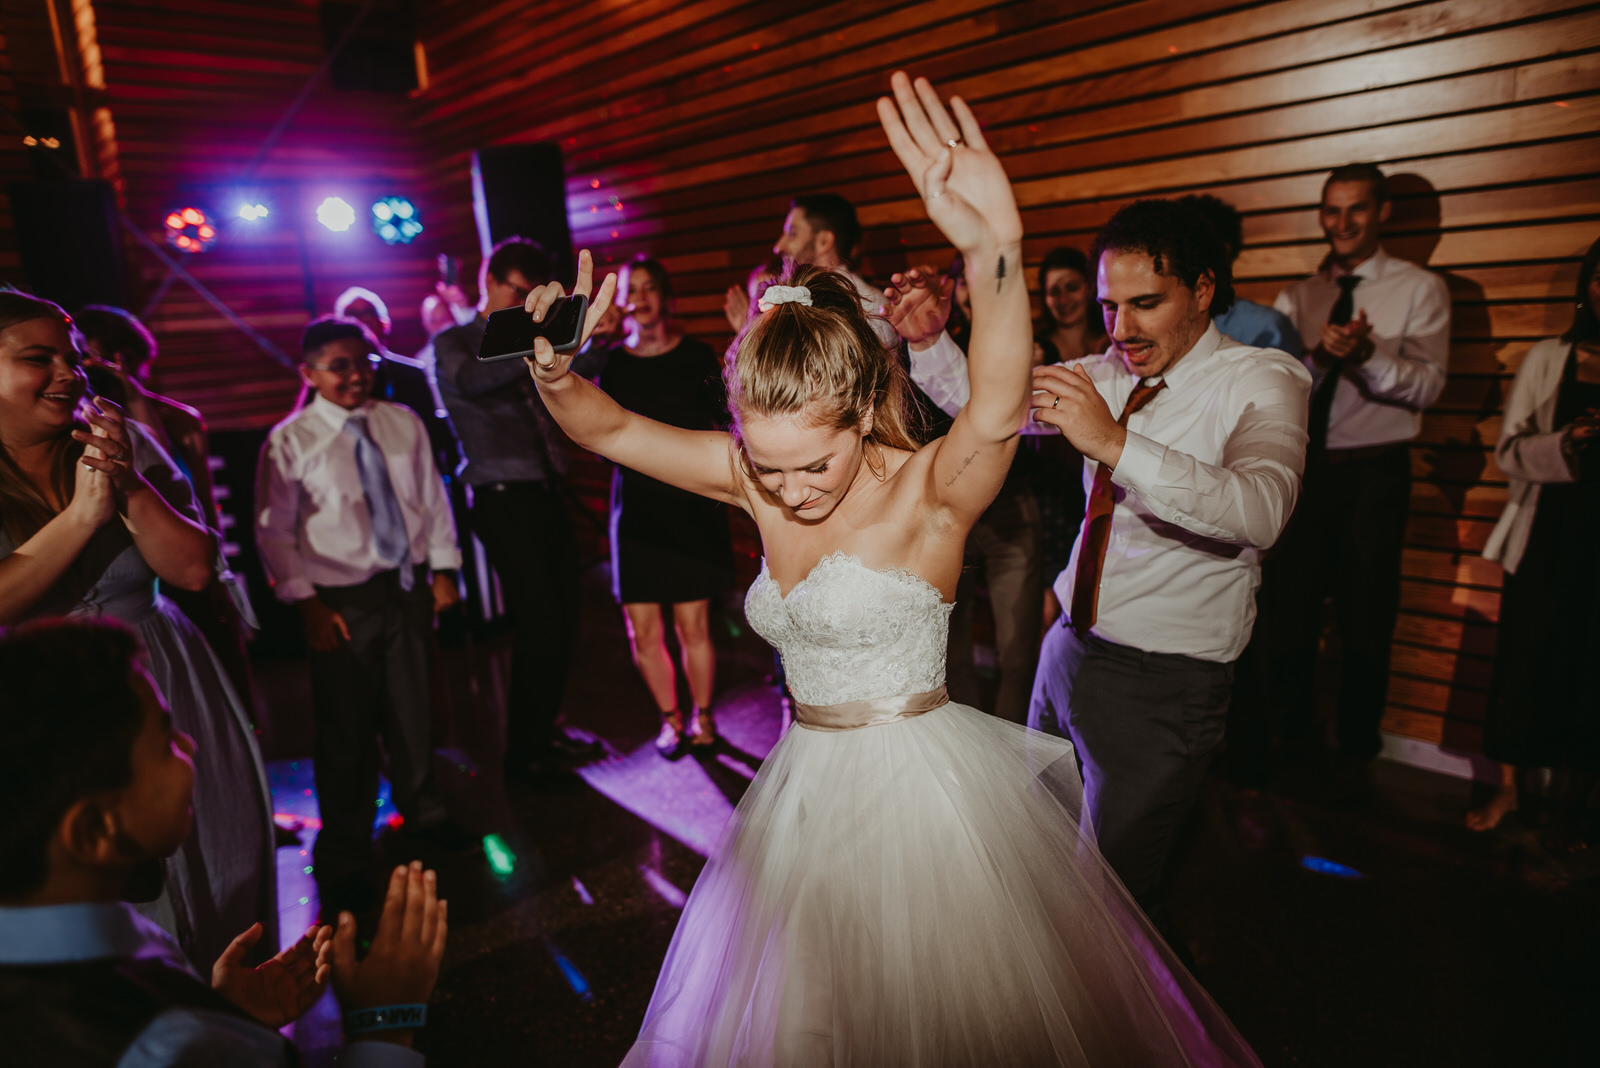 BHLDN bride and groom dance, Crazy egyptian dance party, Bissell tree house Michigan, moody photography, Chicago wedding photography - The Adamkovi